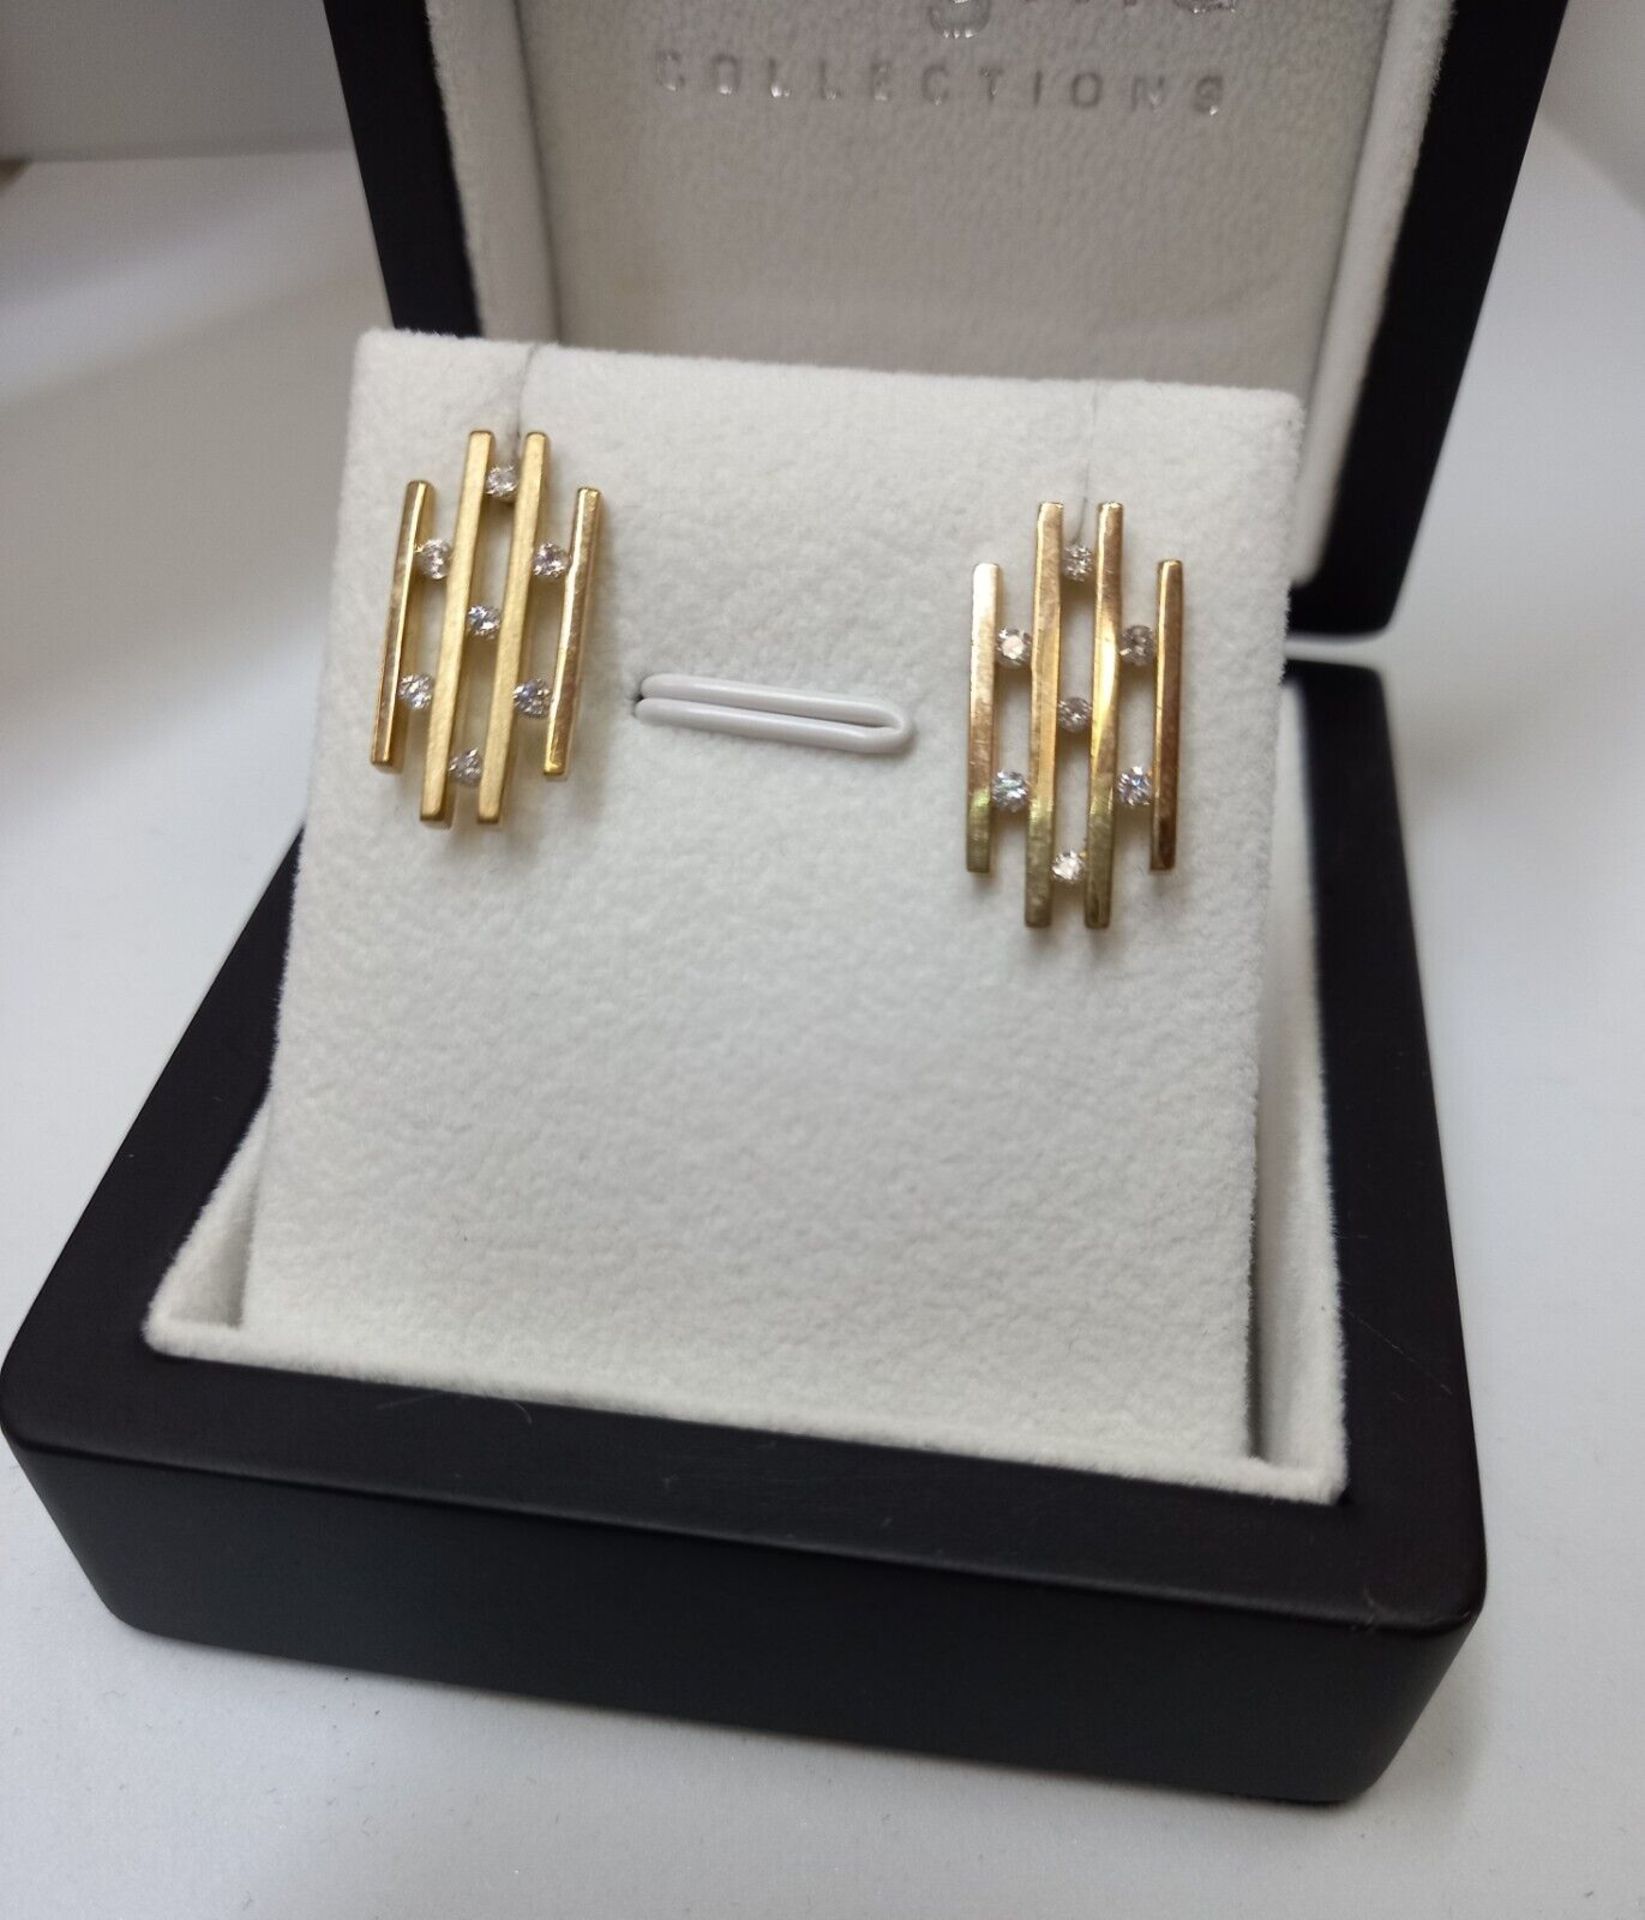 0.30CT DIAMOND EARRING IN SOLID 9CT YELLOW GOLD. IN GIFT BOX + VALUATION CERTIFICATE OF £795 - Image 4 of 5